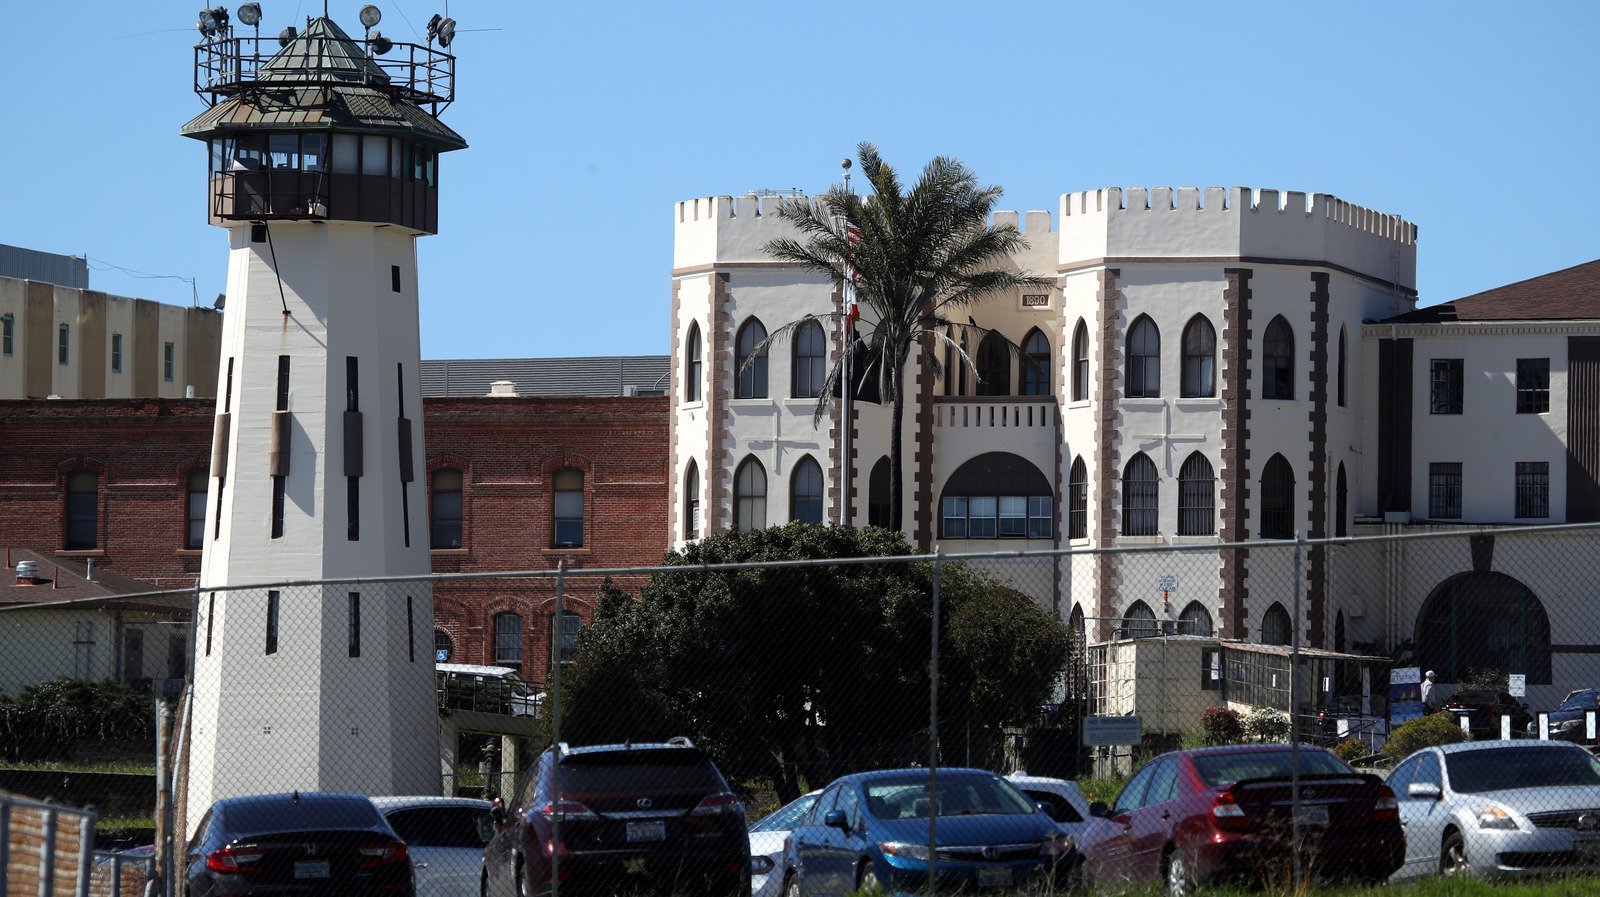 HAVE YOU HEARD OF THESE CHILLING STORIES FROM SAN QUENTIN?